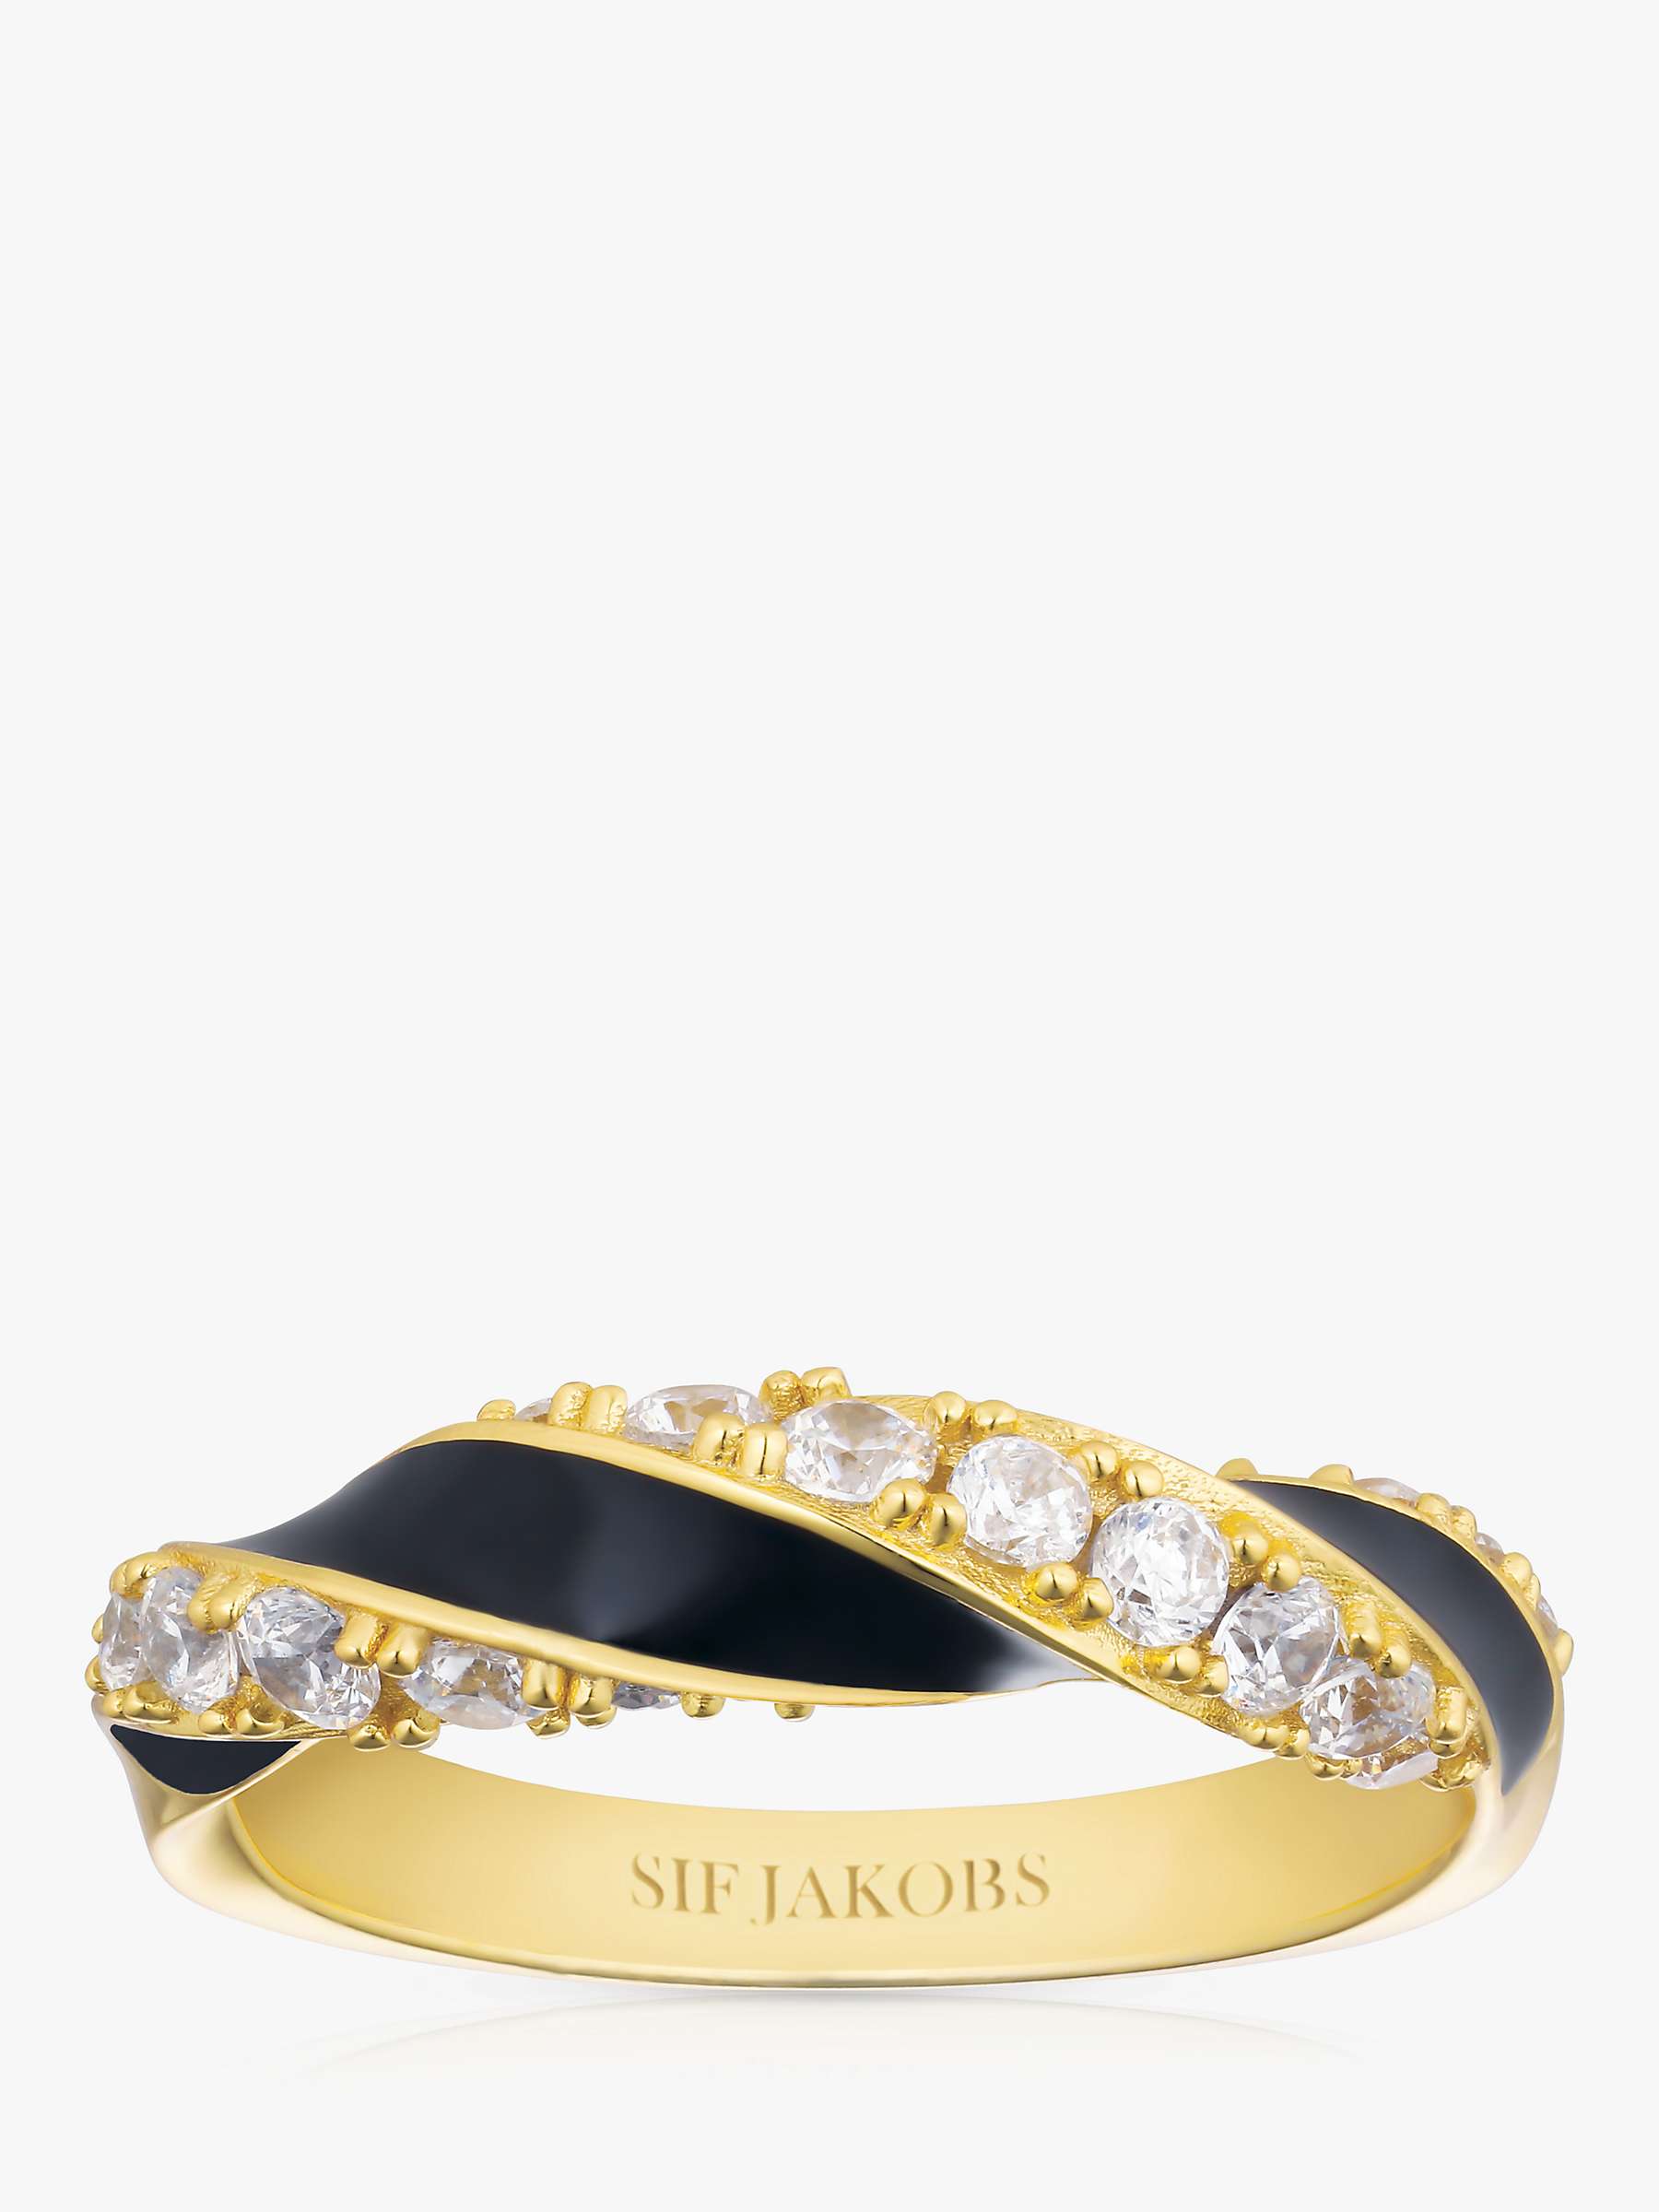 Buy Sif Jakobs Jewellery Enamel and Cubic Zirconia Twist Ring, Gold/Black Online at johnlewis.com